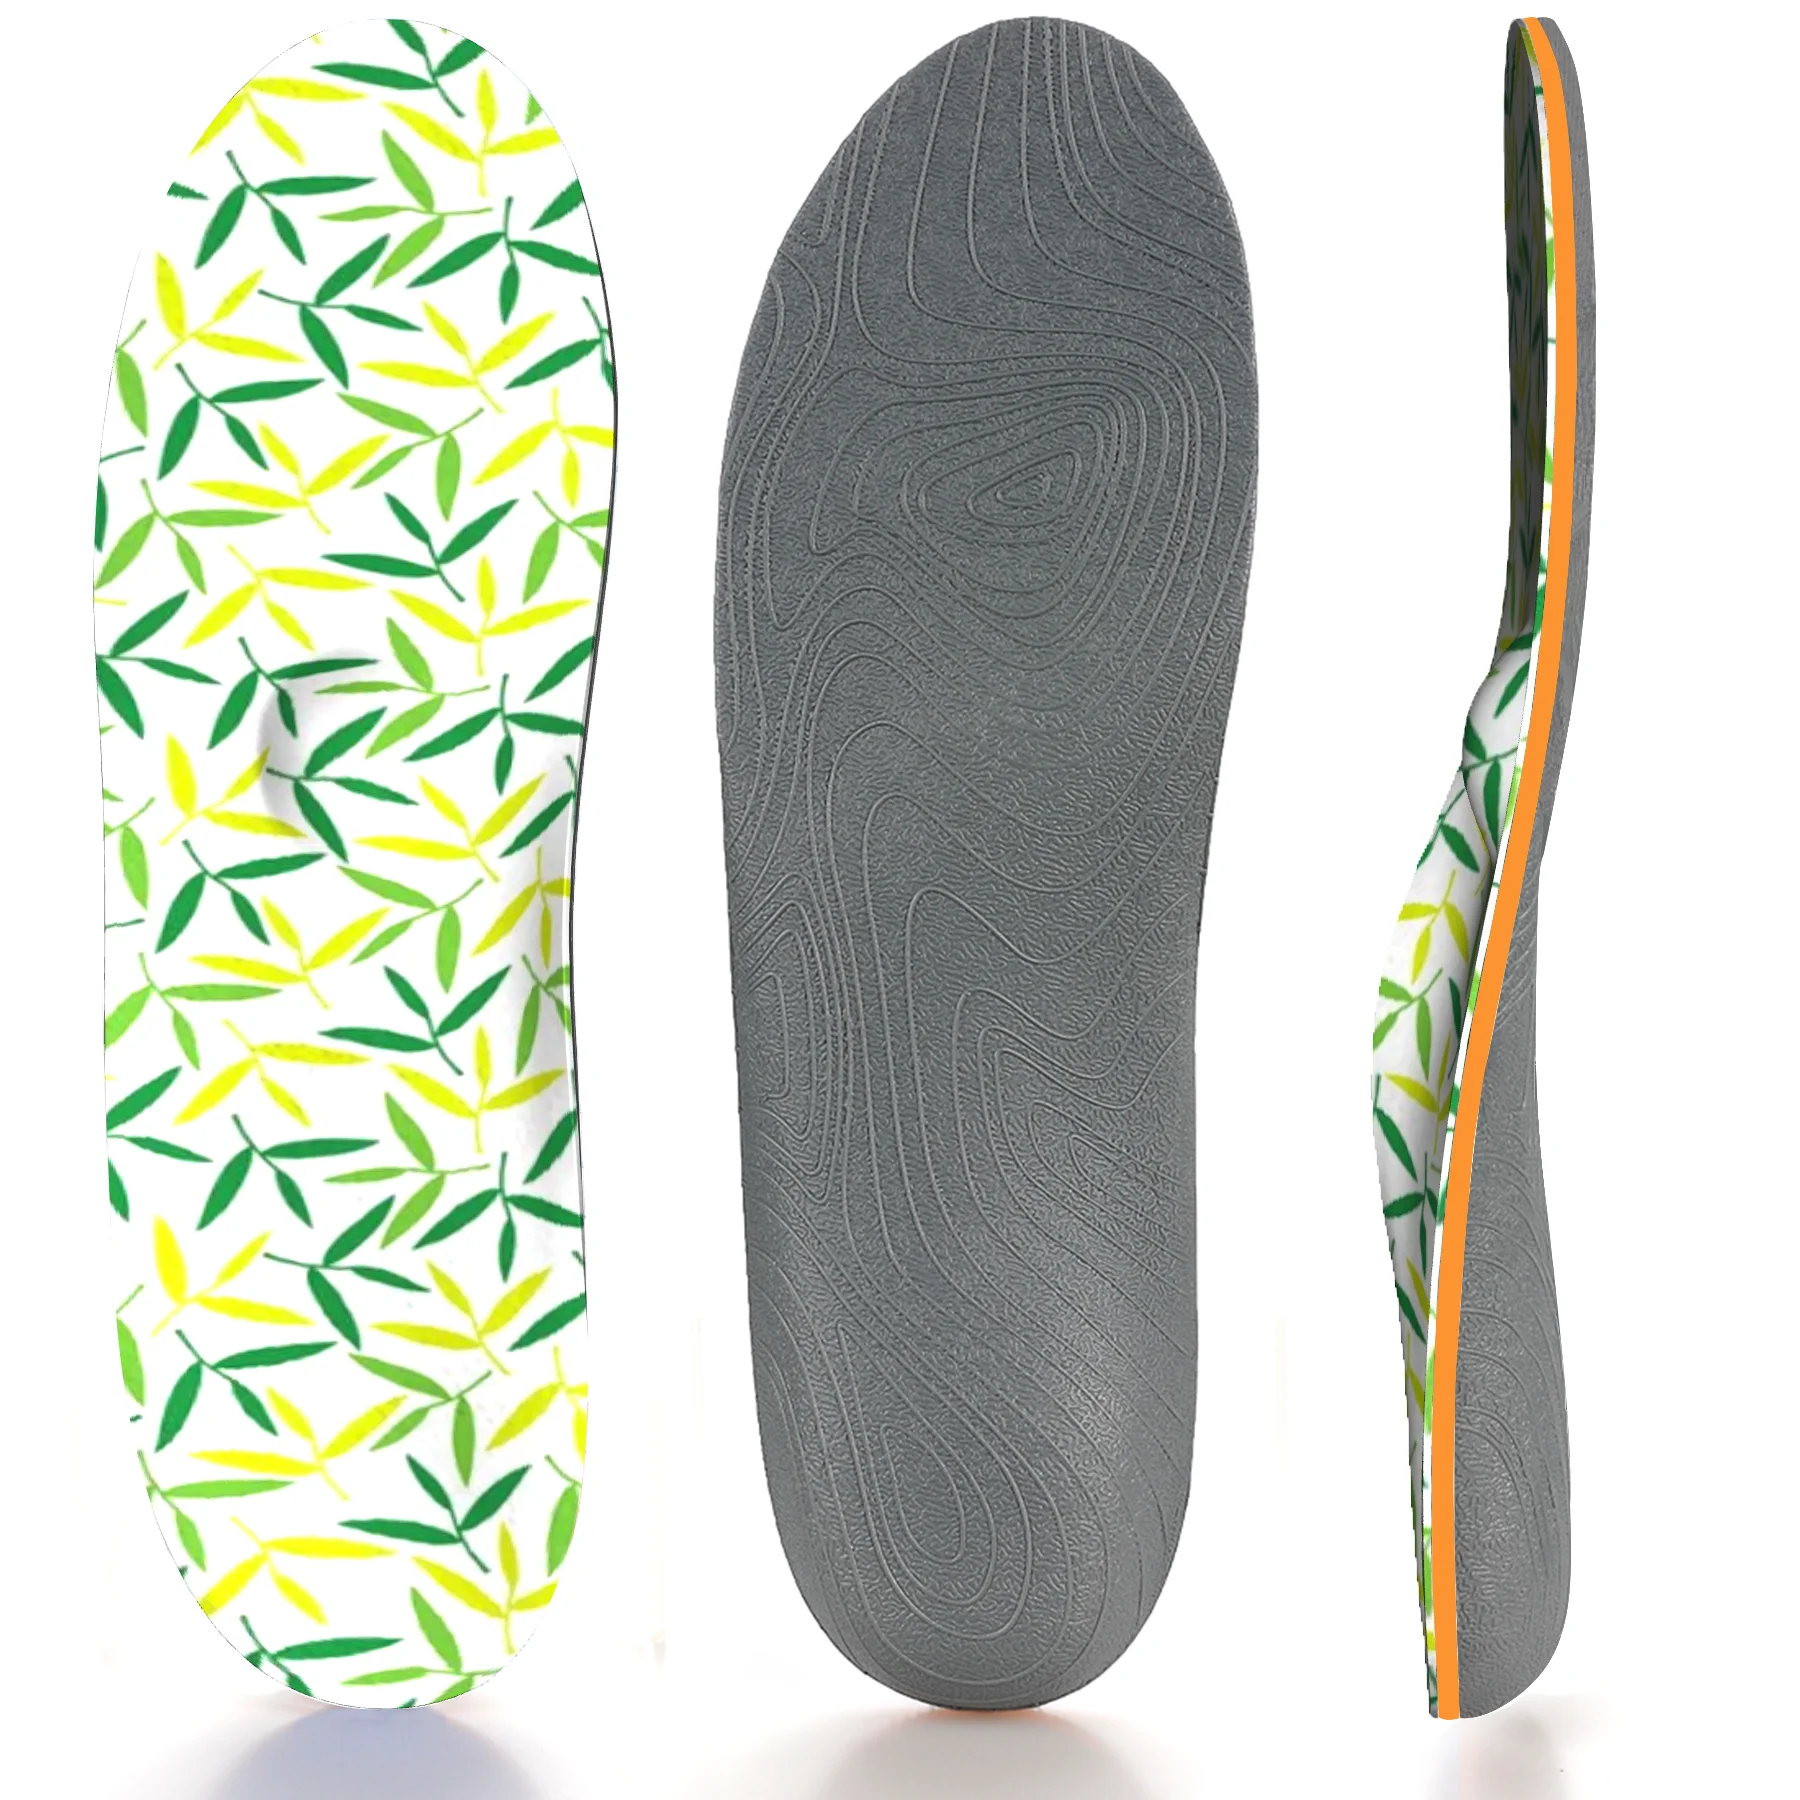 EVA Material, Simple Bamboo Leaf Pattern, Non-slip, Breathable, Shock-absorbing, Orthopedic Arch Support Insole